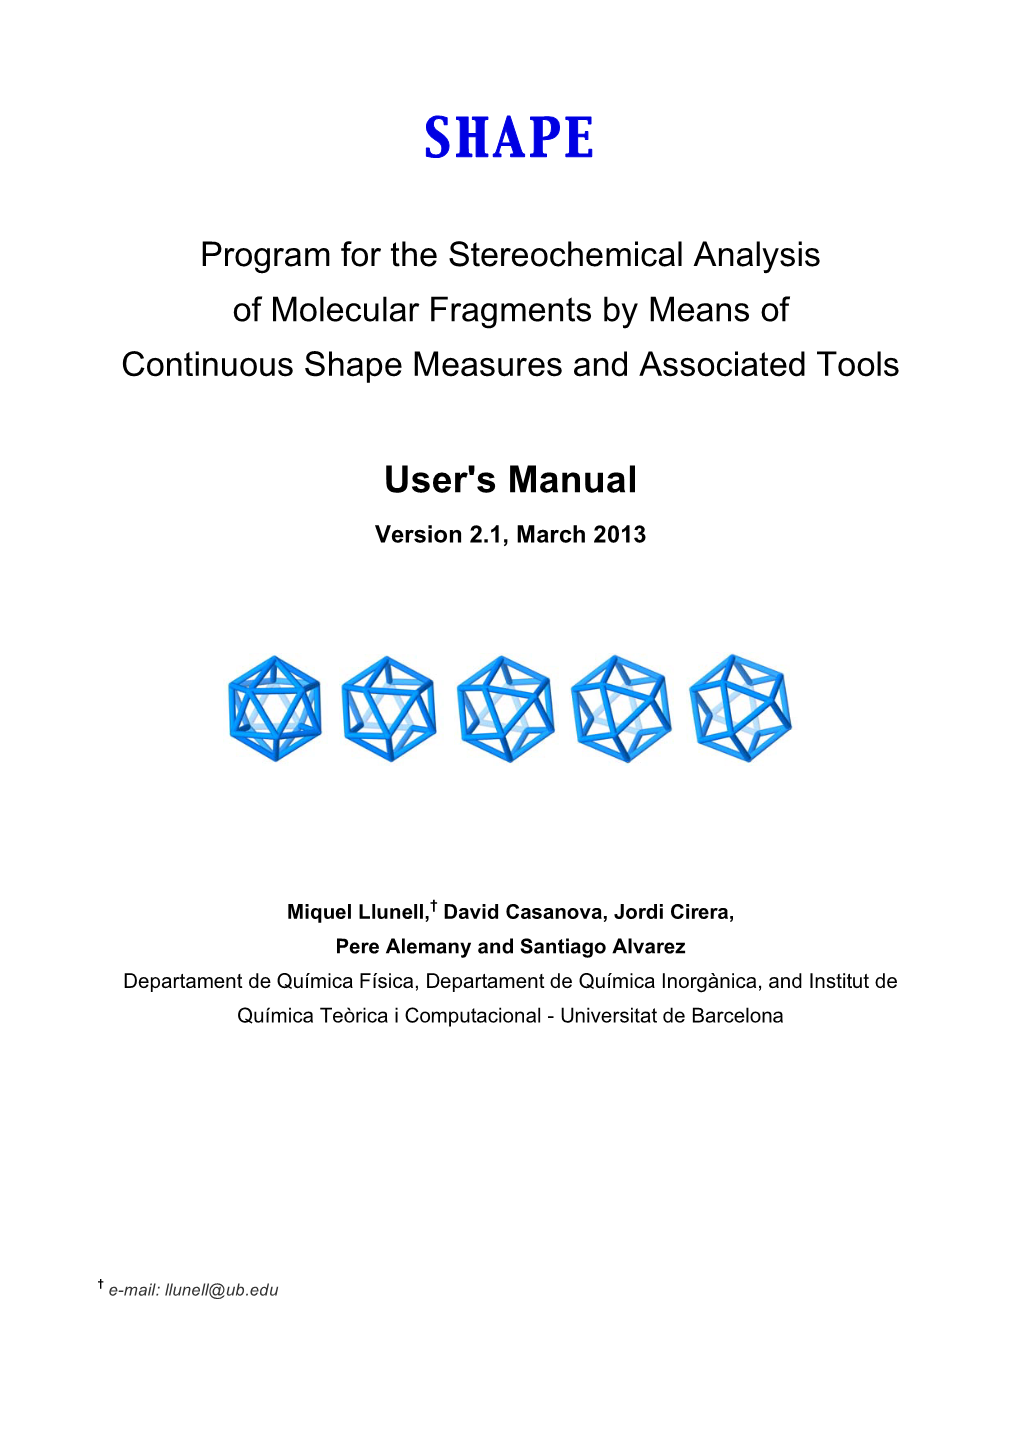 User's Manual Version 2.1, March 2013